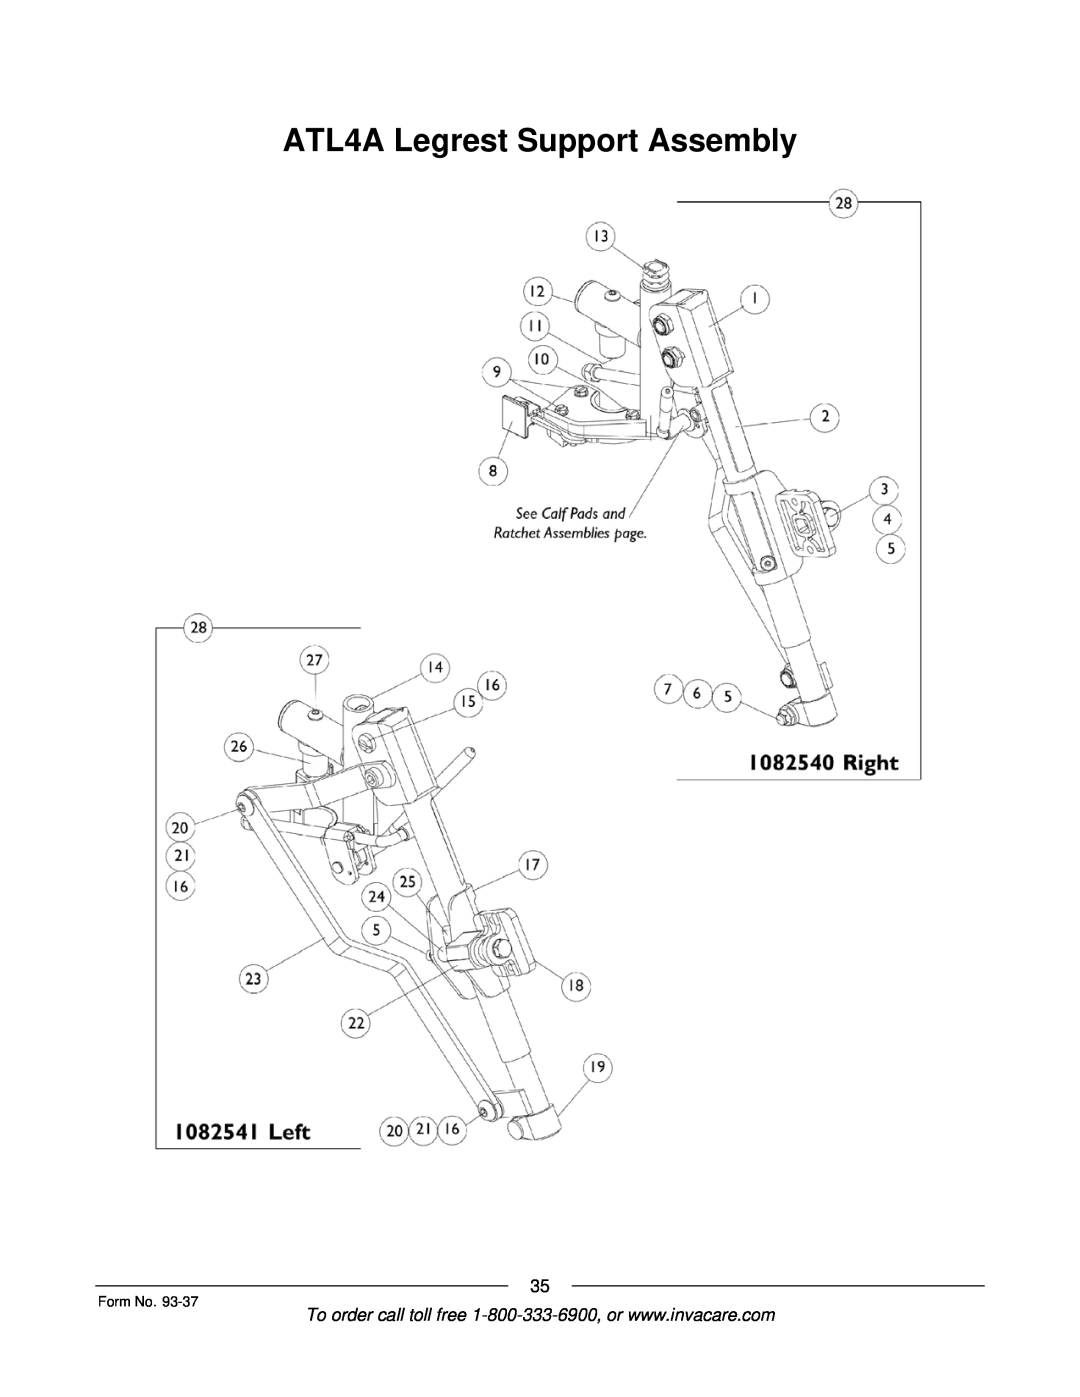 Invacare Power TigerTM manual ATL4A Legrest Support Assembly, Form No 